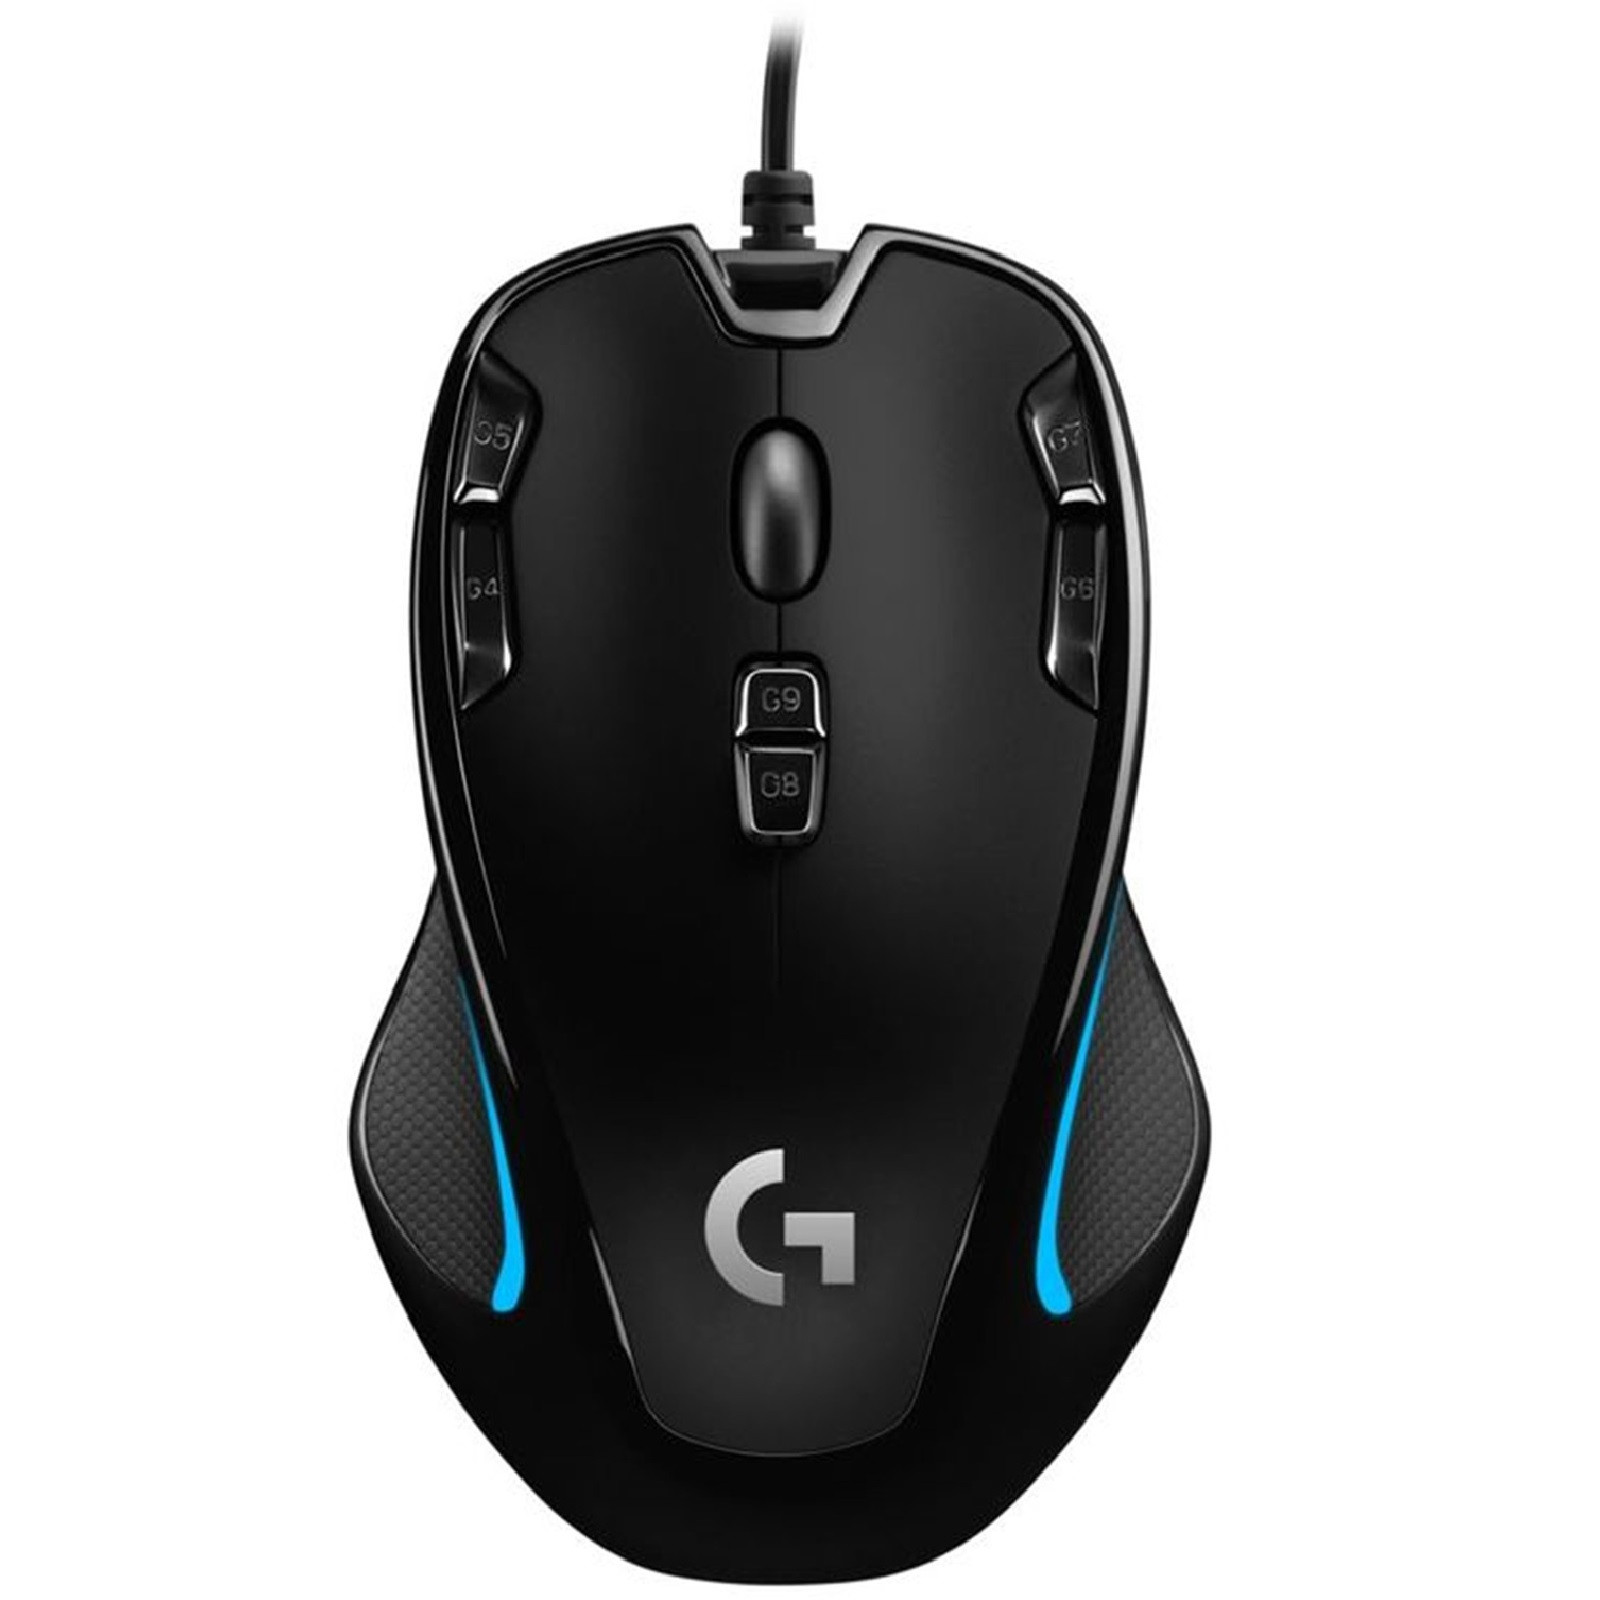 LOGITECH G300 GAMING MOUSE